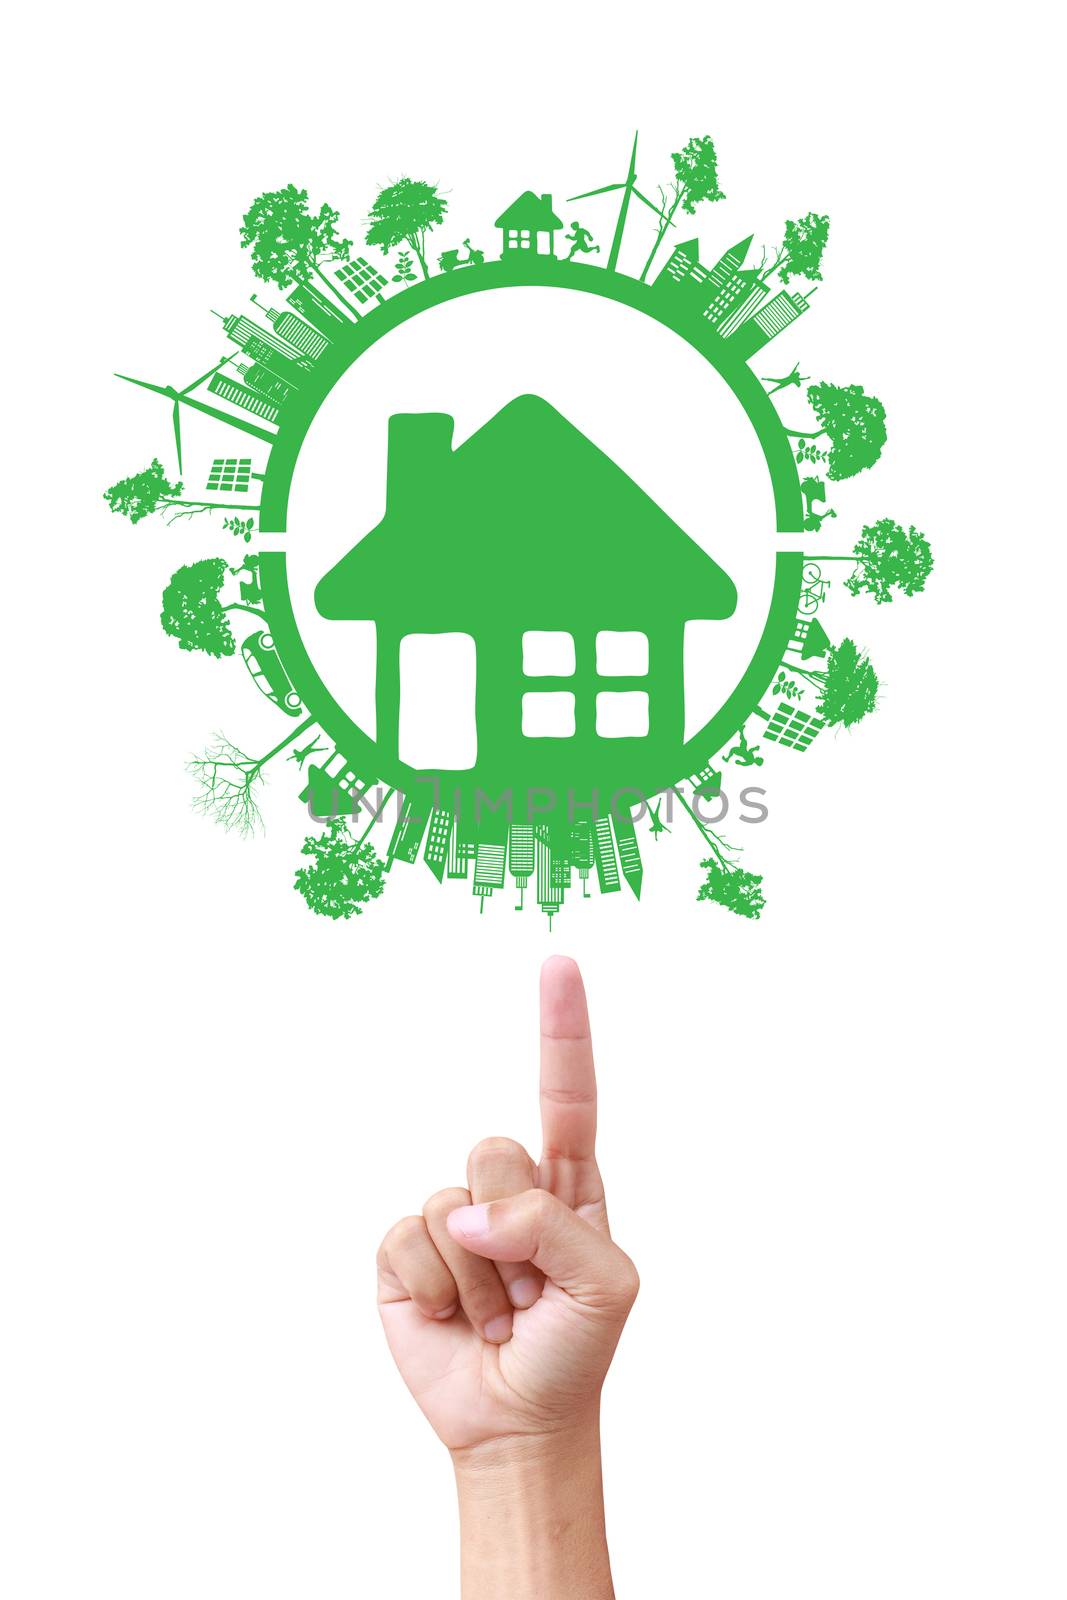 Green house symbol in hand